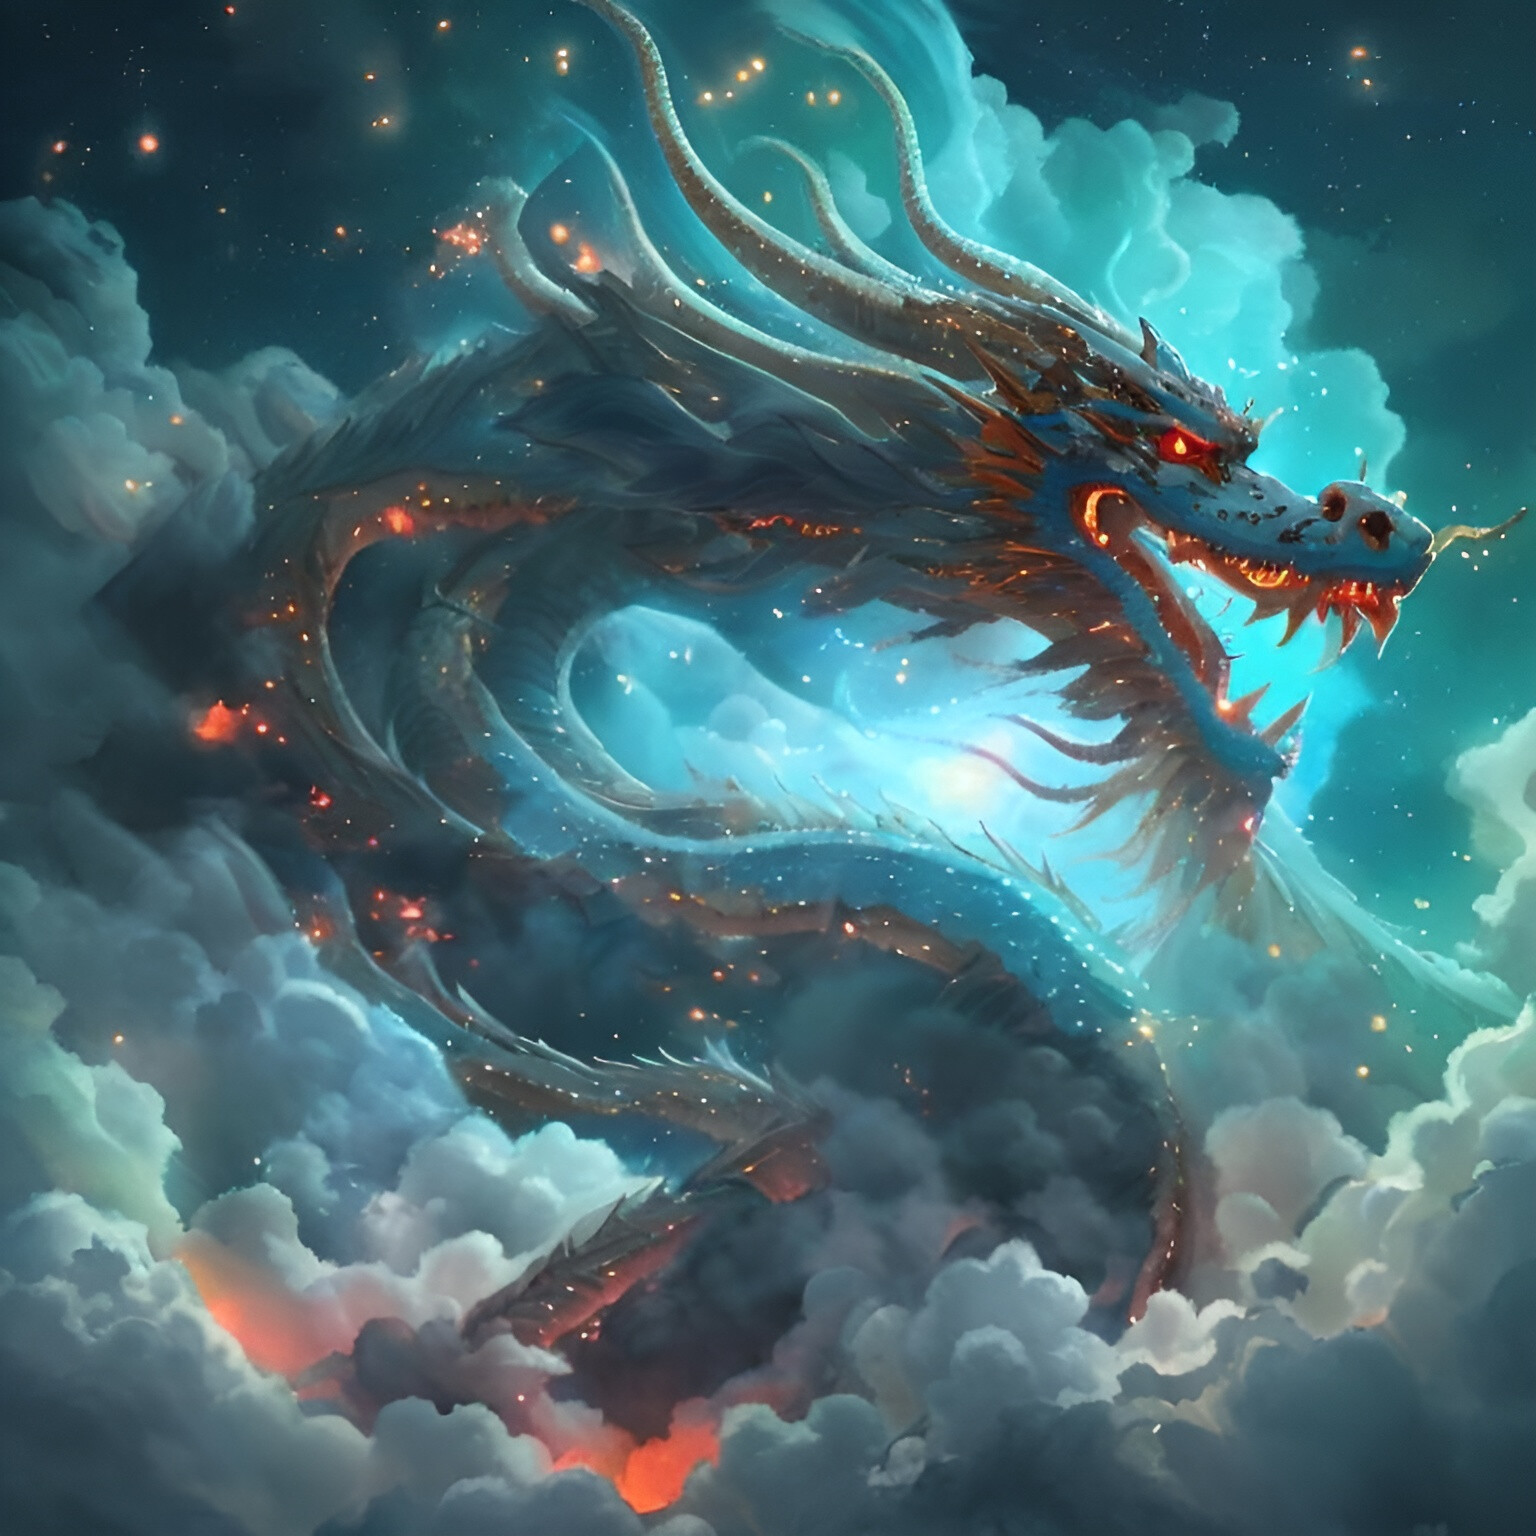 ArtStation - Package of 10 ai art of Chines dragons in the sky | Artworks